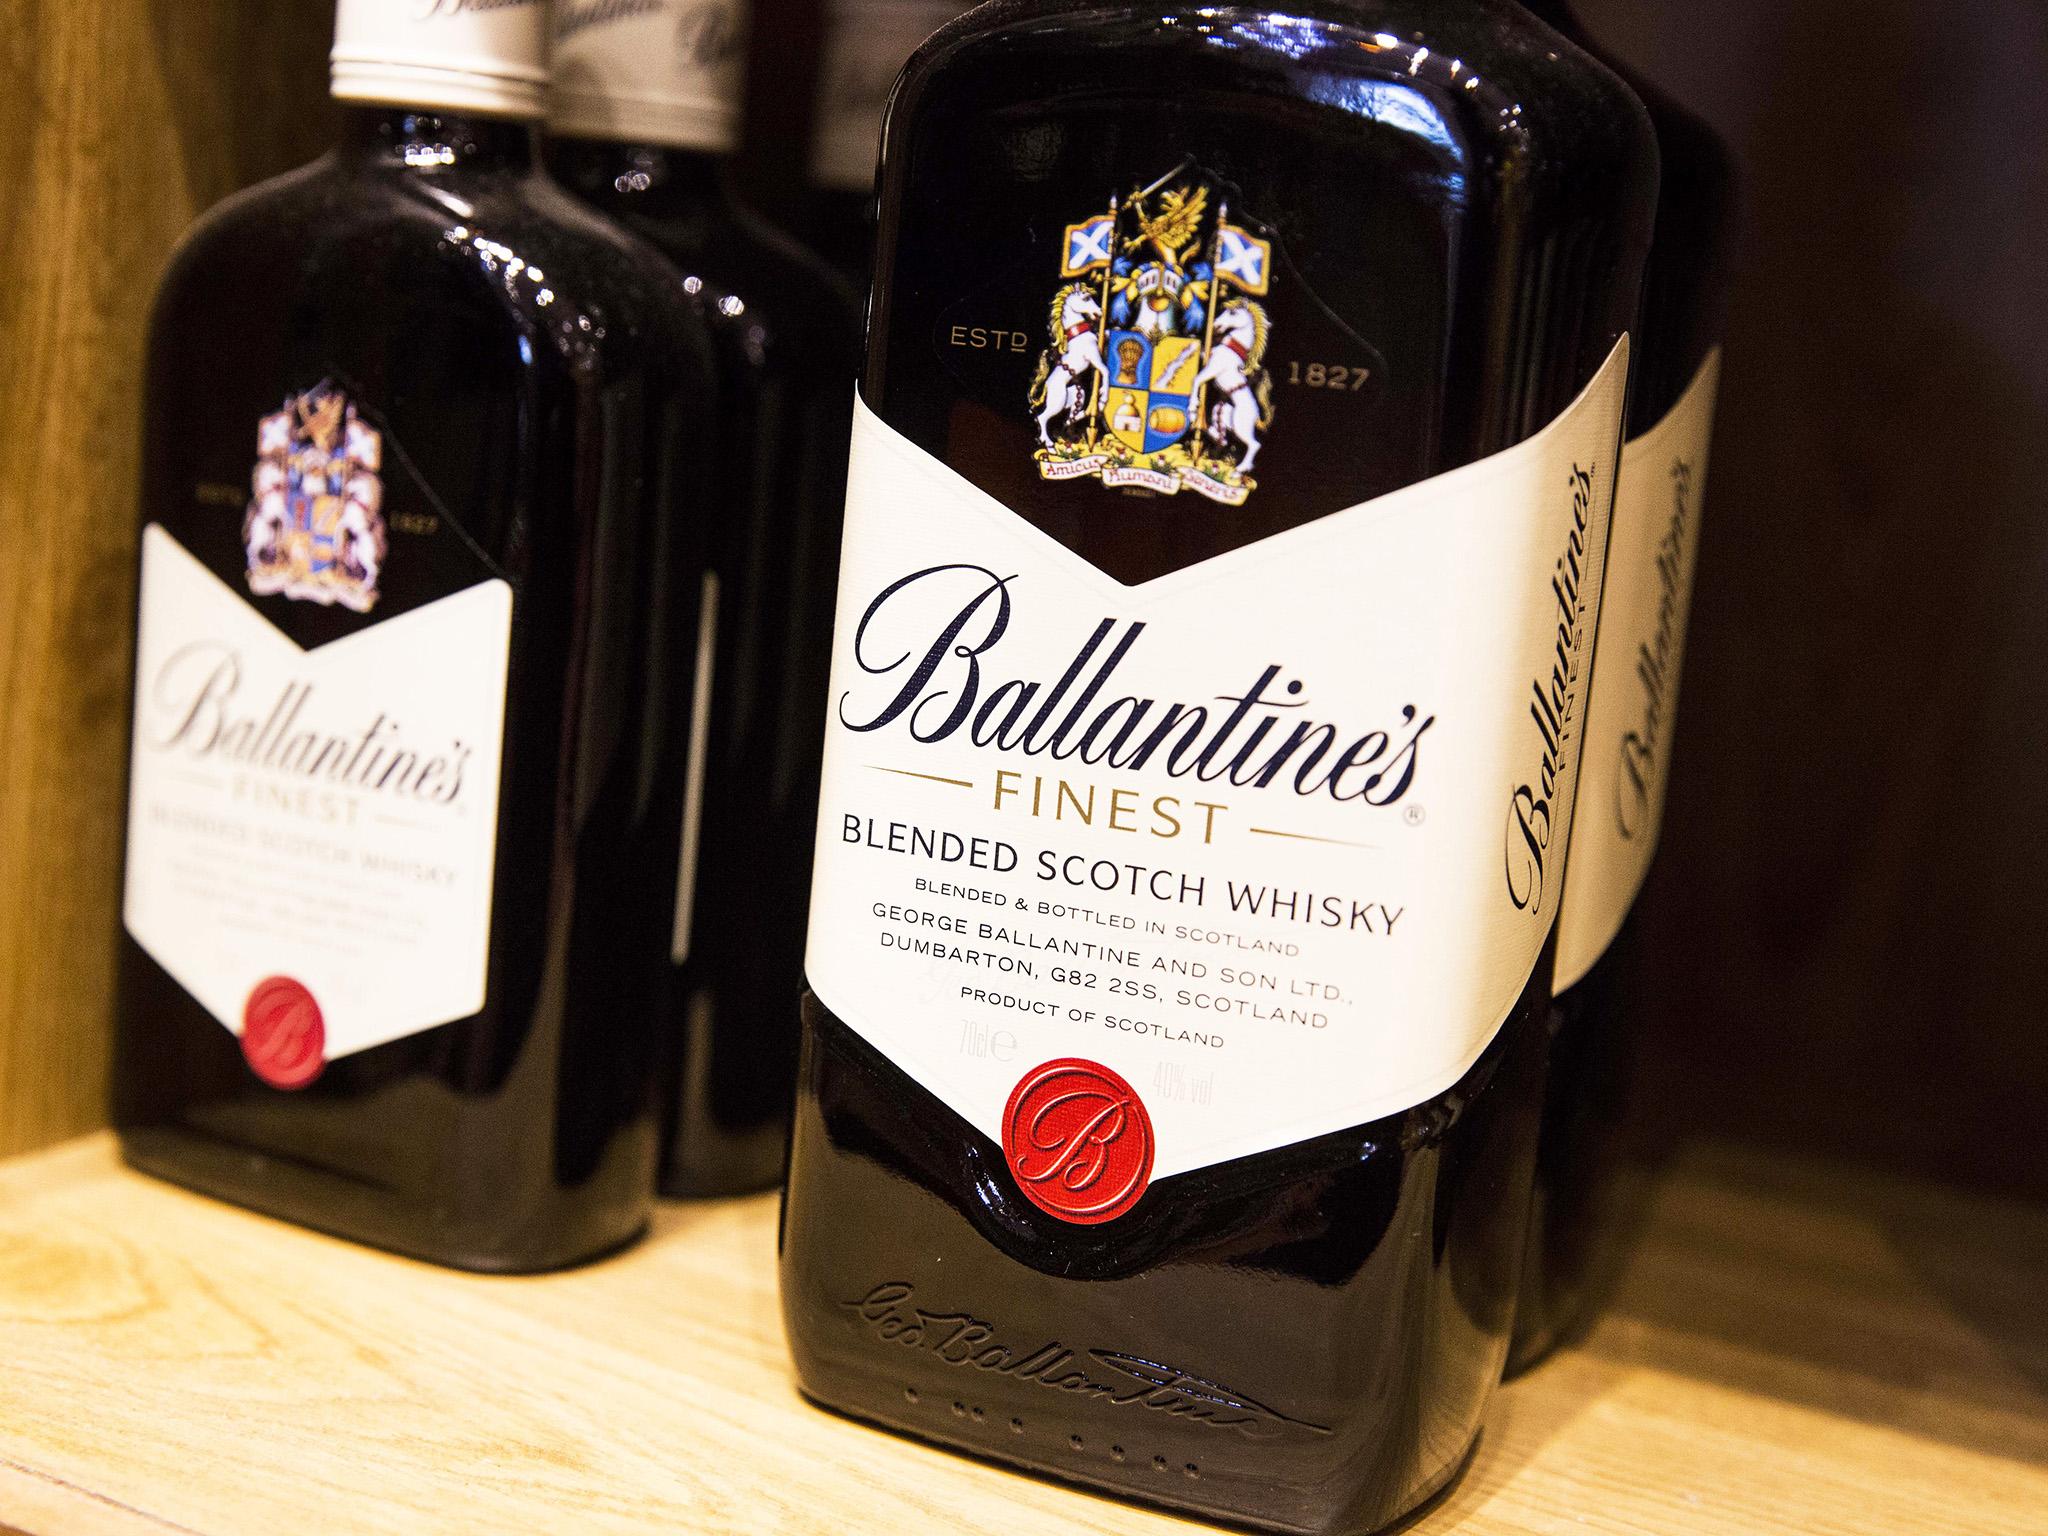 Bottles of Ballantines scotch whiskey, produced by Pernod Ricard SA, sits on a shelf in a restaurant in Paris, France